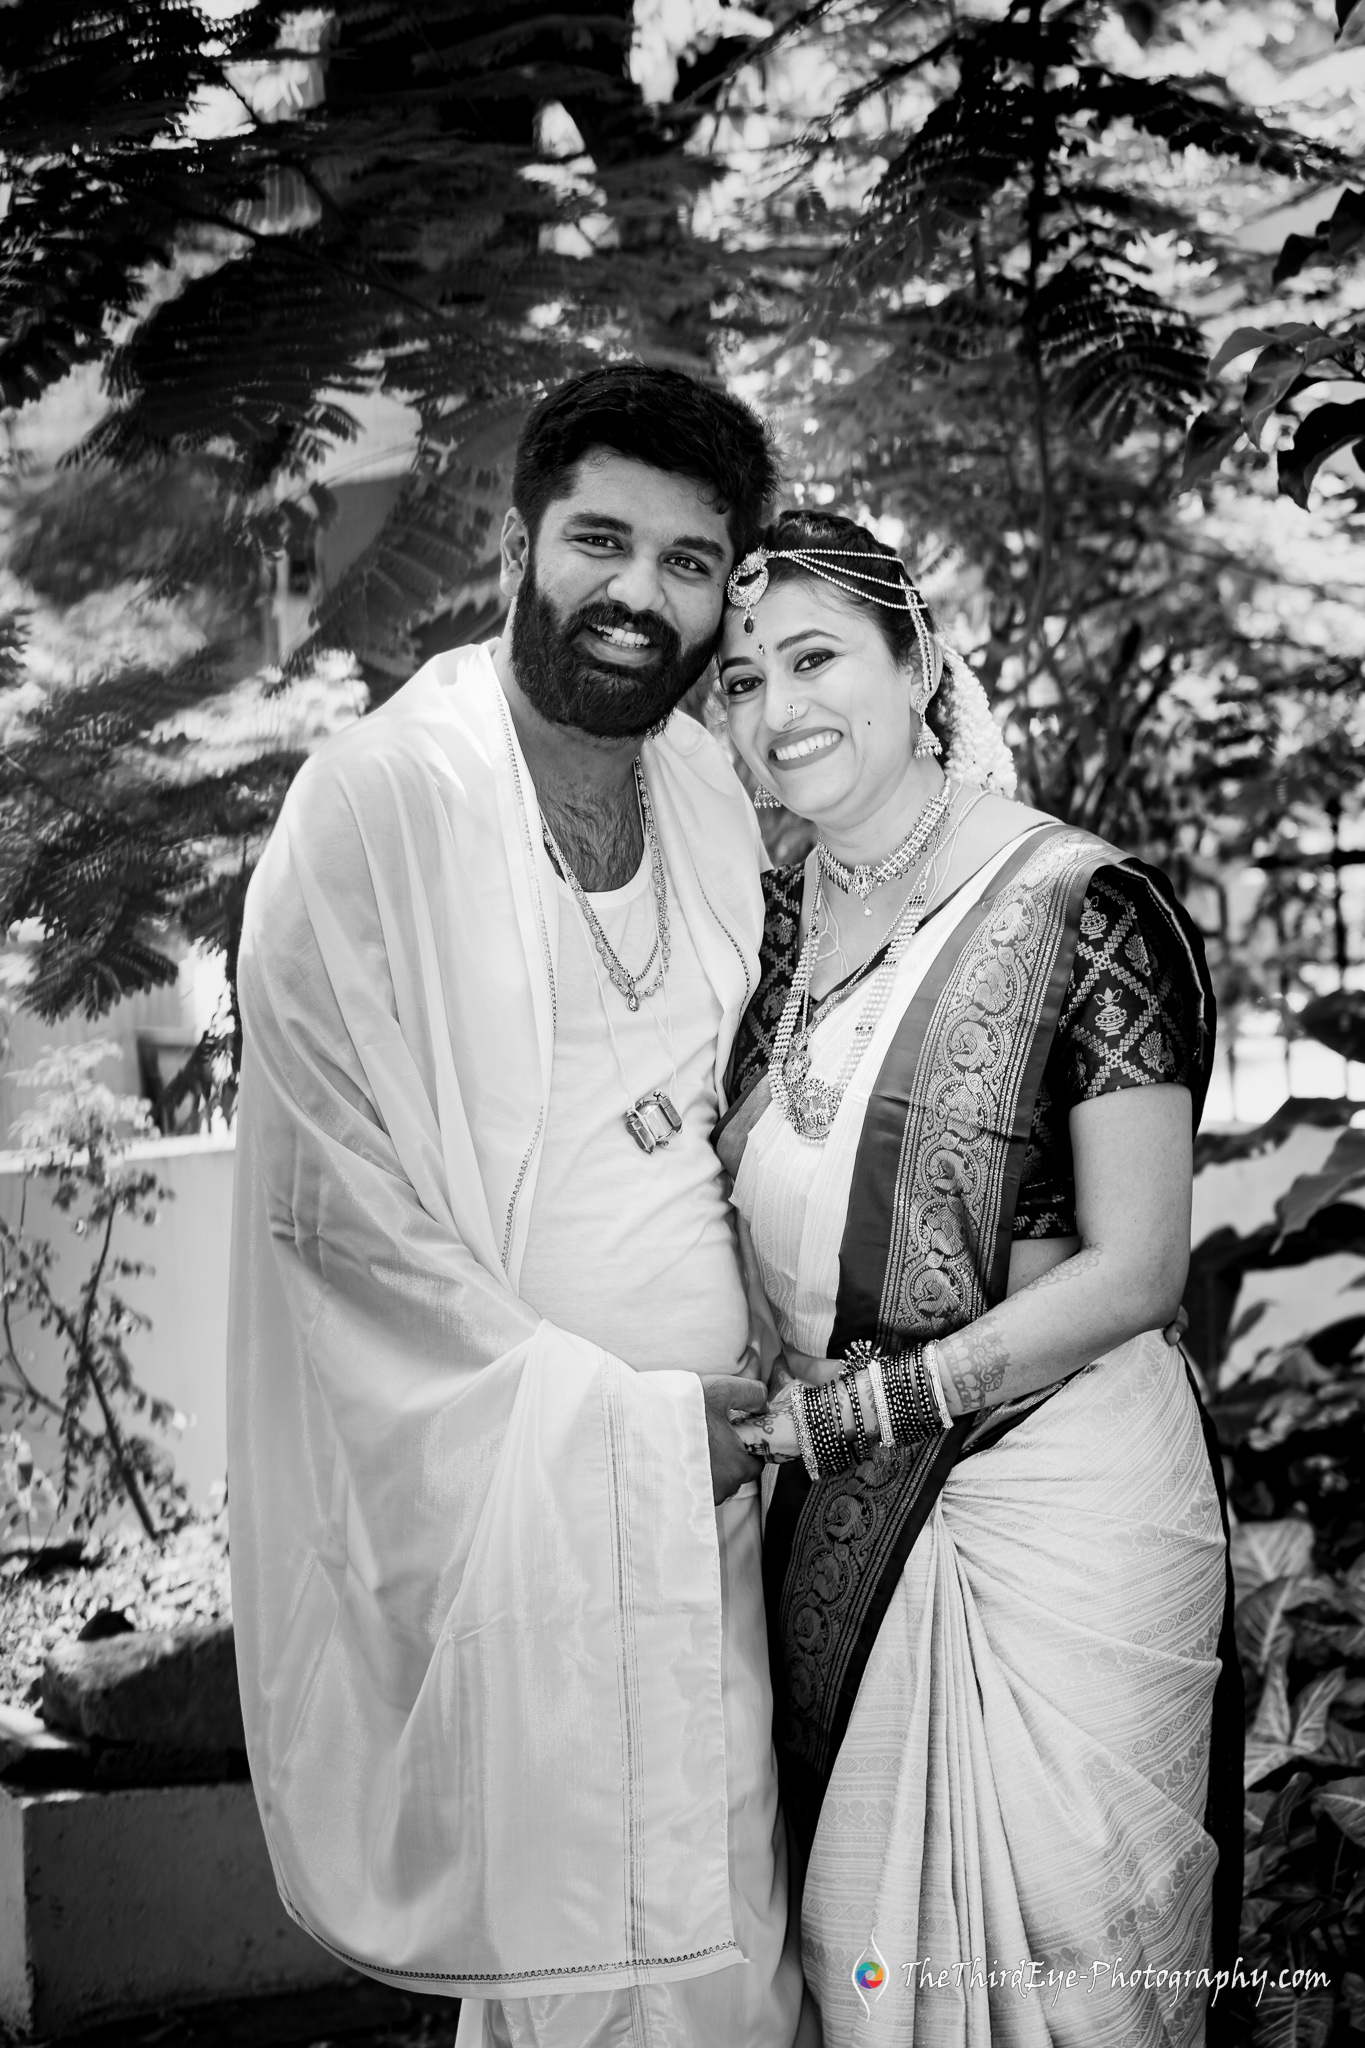 Bride-bridegroom-couple-love-moment-attire-smiles-bw-timeless-happy-Best-South-indian-Candid-Wedding-photographer-Covid-19-TTEP_CM_07_A6500423-2